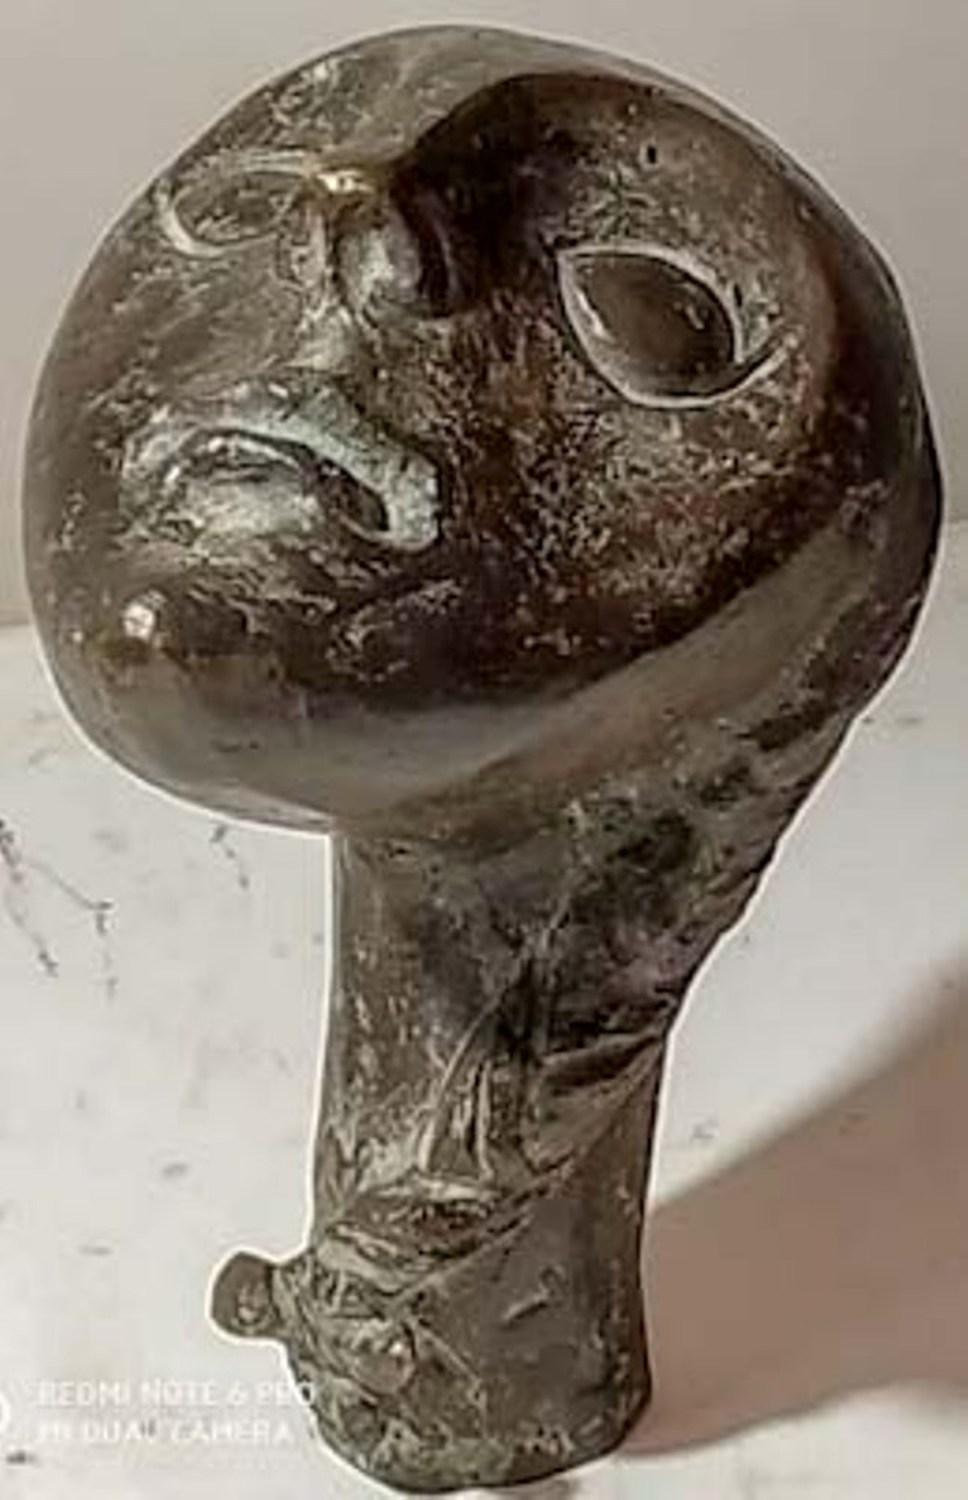 Subrata Biswas Figurative Sculpture - Face, Bronze Sculpture by Contemporary Indian Artist "In Stock"